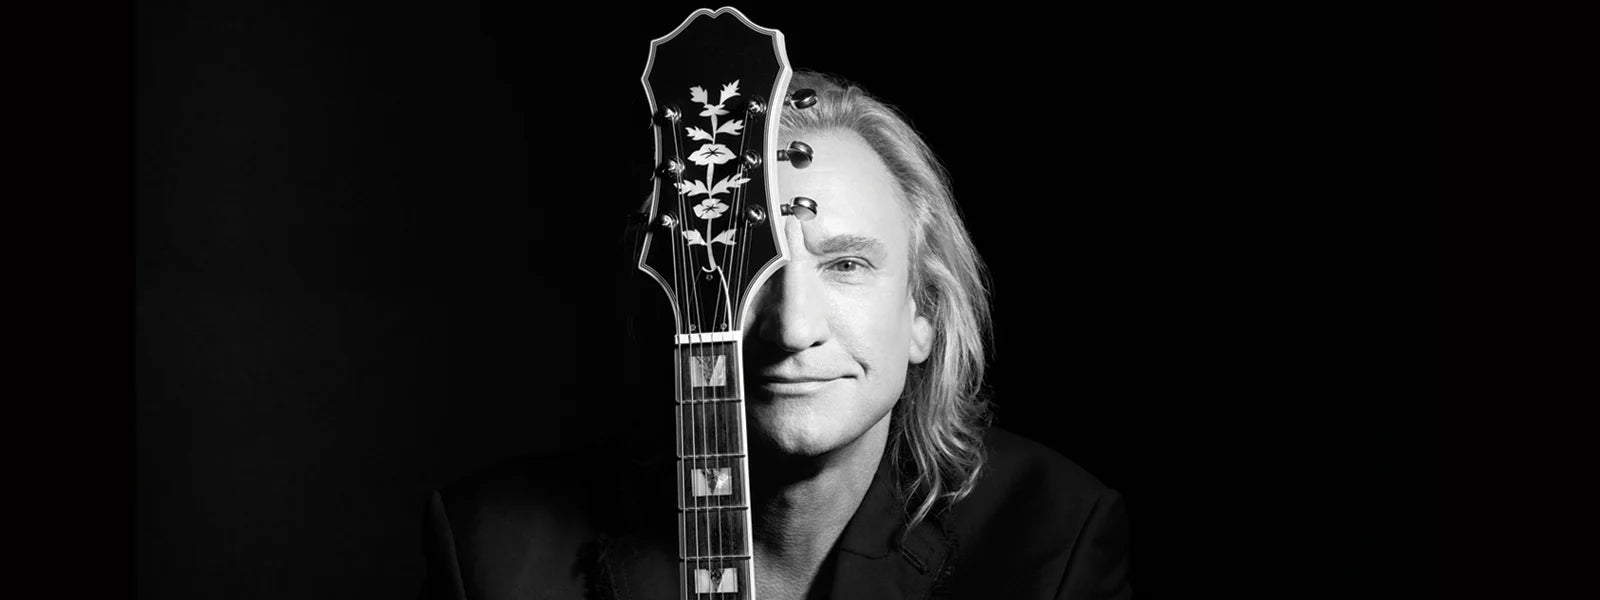 Black and white photo of Joe Walsh posing with guitar, smiling